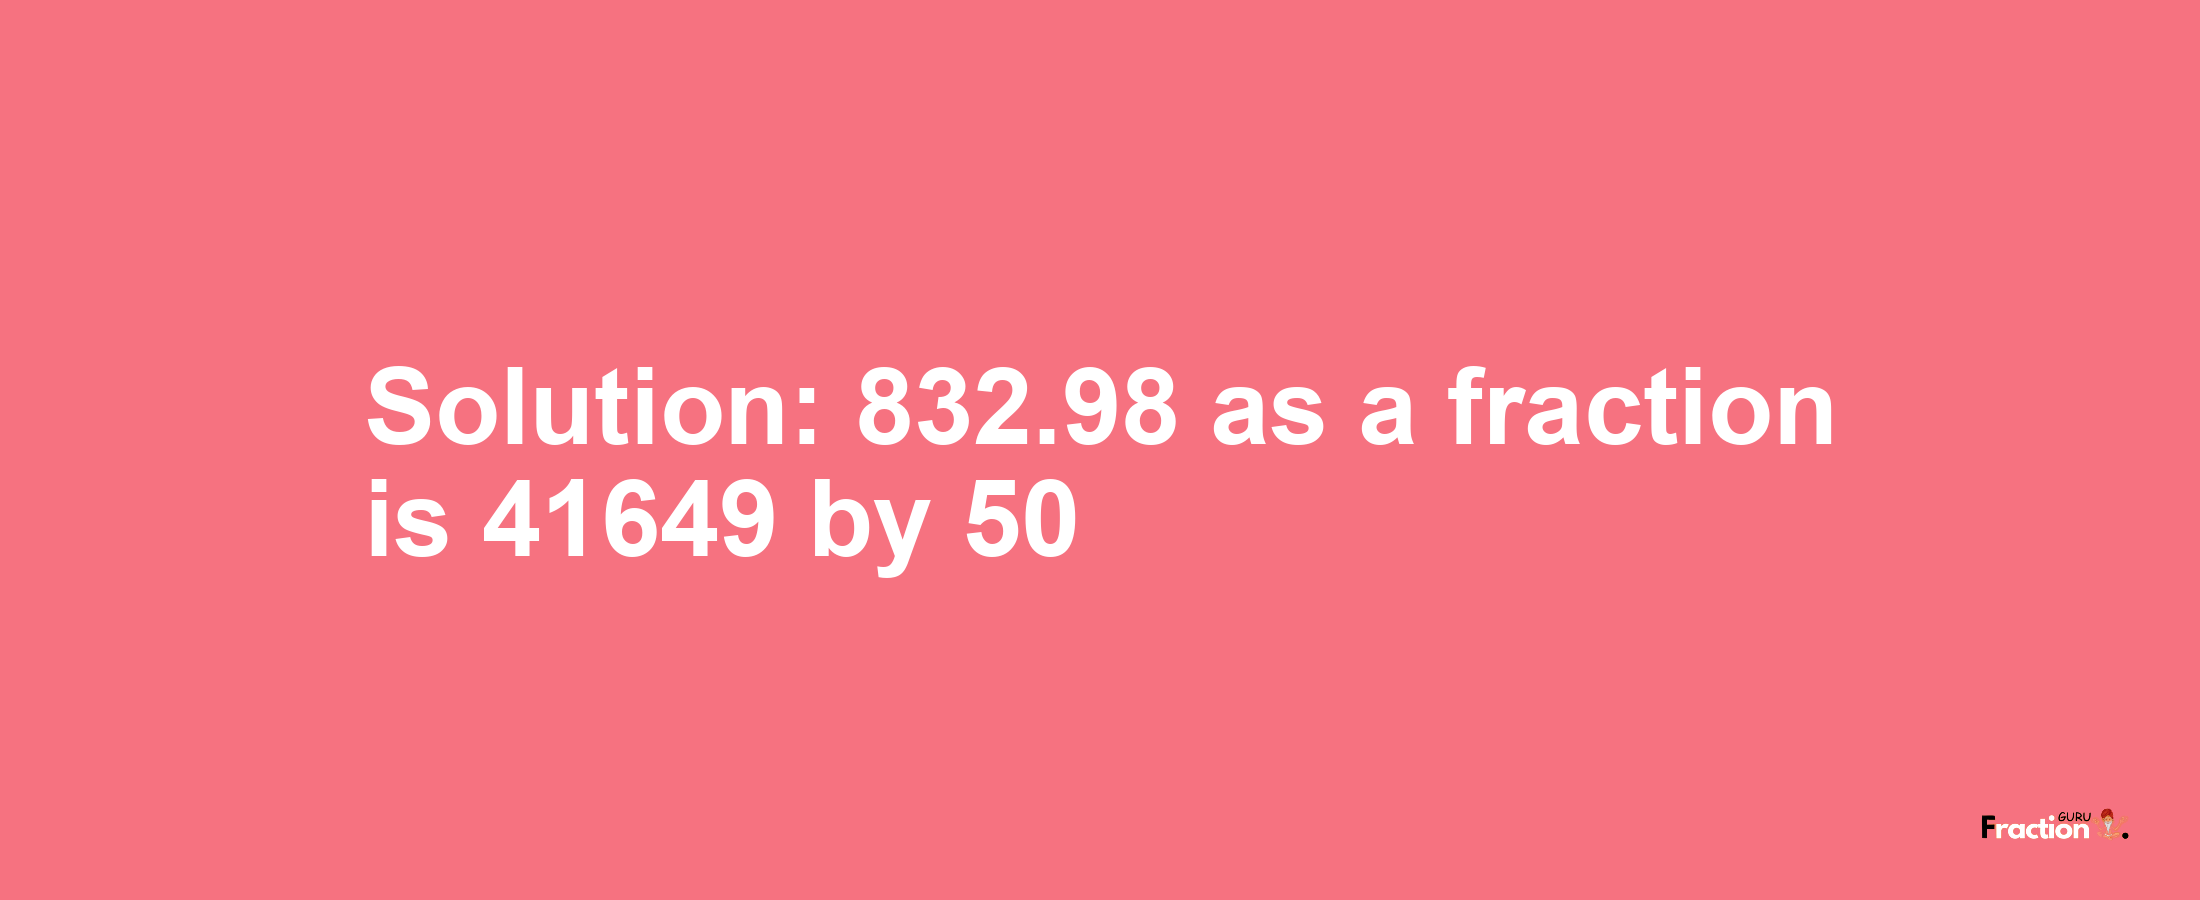 Solution:832.98 as a fraction is 41649/50